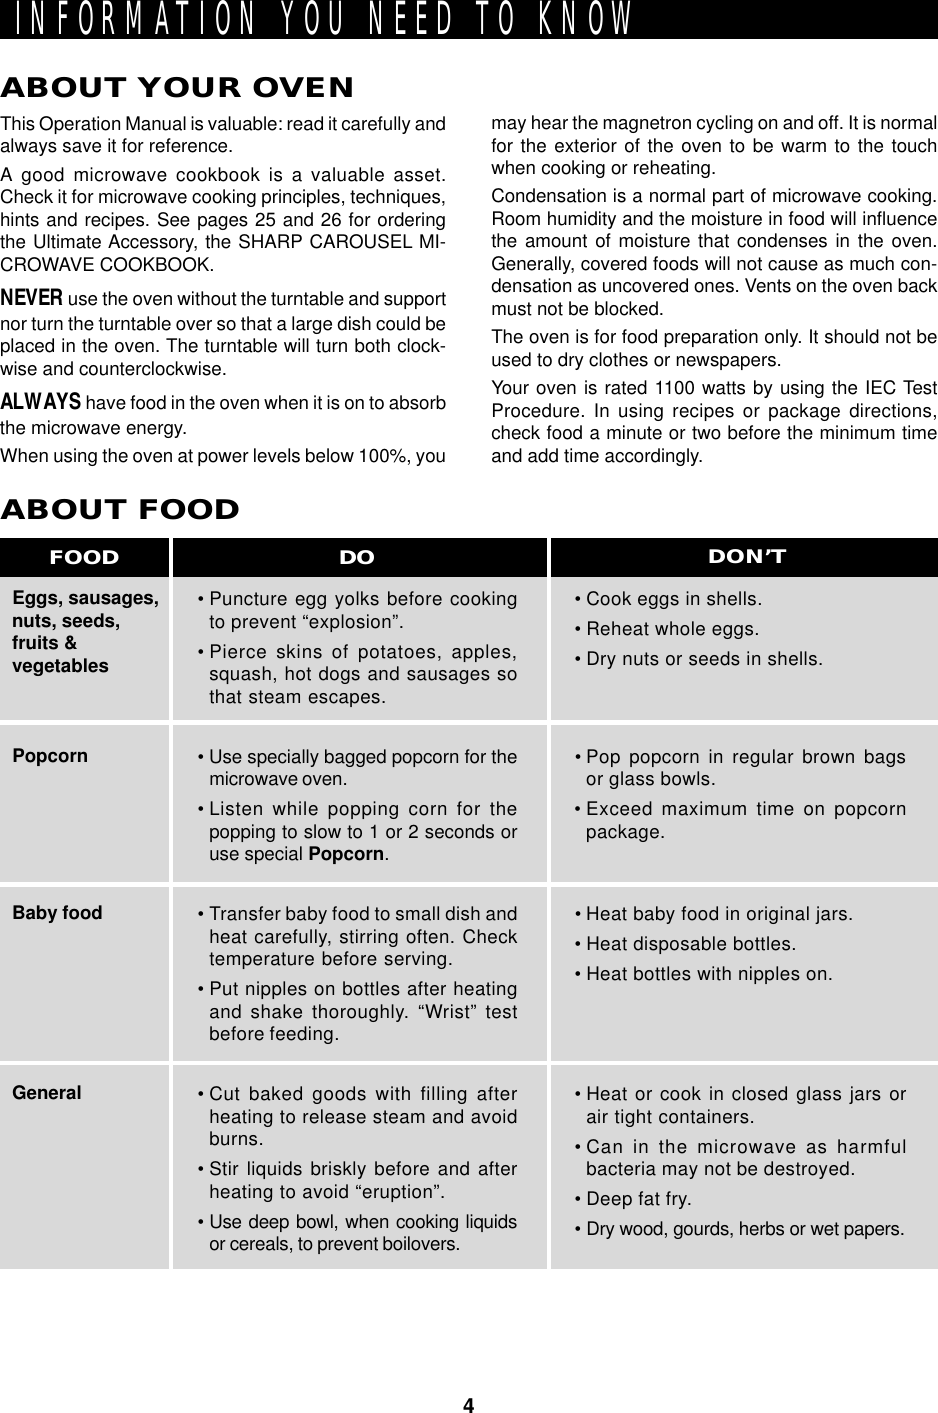 4INFORMATION YOU NEED TO KNOWABOUT YOUR OVENThis Operation Manual is valuable: read it carefully andalways save it for reference.A good microwave cookbook is a valuable asset.Check it for microwave cooking principles, techniques,hints and recipes. See pages 25 and 26 for orderingthe Ultimate Accessory, the SHARP CAROUSEL MI-CROWAVE COOKBOOK.NEVER use the oven without the turntable and supportnor turn the turntable over so that a large dish could beplaced in the oven. The turntable will turn both clock-wise and counterclockwise.ALWAYS have food in the oven when it is on to absorbthe microwave energy.When using the oven at power levels below 100%, youEggs, sausages,nuts, seeds,fruits &amp;vegetablesPopcornBaby foodGeneralABOUT FOOD• Puncture egg yolks before cookingto prevent “explosion”.• Pierce skins of potatoes, apples,squash, hot dogs and sausages sothat steam escapes.• Use specially bagged popcorn for themicrowave oven.• Listen while popping corn for thepopping to slow to 1 or 2 seconds oruse special Popcorn.• Transfer baby food to small dish andheat carefully, stirring often. Checktemperature before serving.• Put nipples on bottles after heatingand shake thoroughly. “Wrist” testbefore feeding.• Cut baked goods with filling afterheating to release steam and avoidburns.• Stir liquids briskly before and afterheating to avoid “eruption”.• Use deep bowl, when cooking liquidsor cereals, to prevent boilovers.• Cook eggs in shells.• Reheat whole eggs.• Dry nuts or seeds in shells.• Pop popcorn in regular brown bagsor glass bowls.• Exceed maximum time on popcornpackage.• Heat baby food in original jars.• Heat disposable bottles.• Heat bottles with nipples on.• Heat or cook in closed glass jars orair tight containers.• Can in the microwave as harmfulbacteria may not be destroyed.• Deep fat fry.• Dry wood, gourds, herbs or wet papers.DO DON’TFOODmay hear the magnetron cycling on and off. It is normalfor the exterior of the oven to be warm to the touchwhen cooking or reheating.Condensation is a normal part of microwave cooking.Room humidity and the moisture in food will influencethe amount of moisture that condenses in the oven.Generally, covered foods will not cause as much con-densation as uncovered ones. Vents on the oven backmust not be blocked.The oven is for food preparation only. It should not beused to dry clothes or newspapers.Your oven is rated 1100 watts by using the IEC TestProcedure. In using recipes or package directions,check food a minute or two before the minimum timeand add time accordingly.